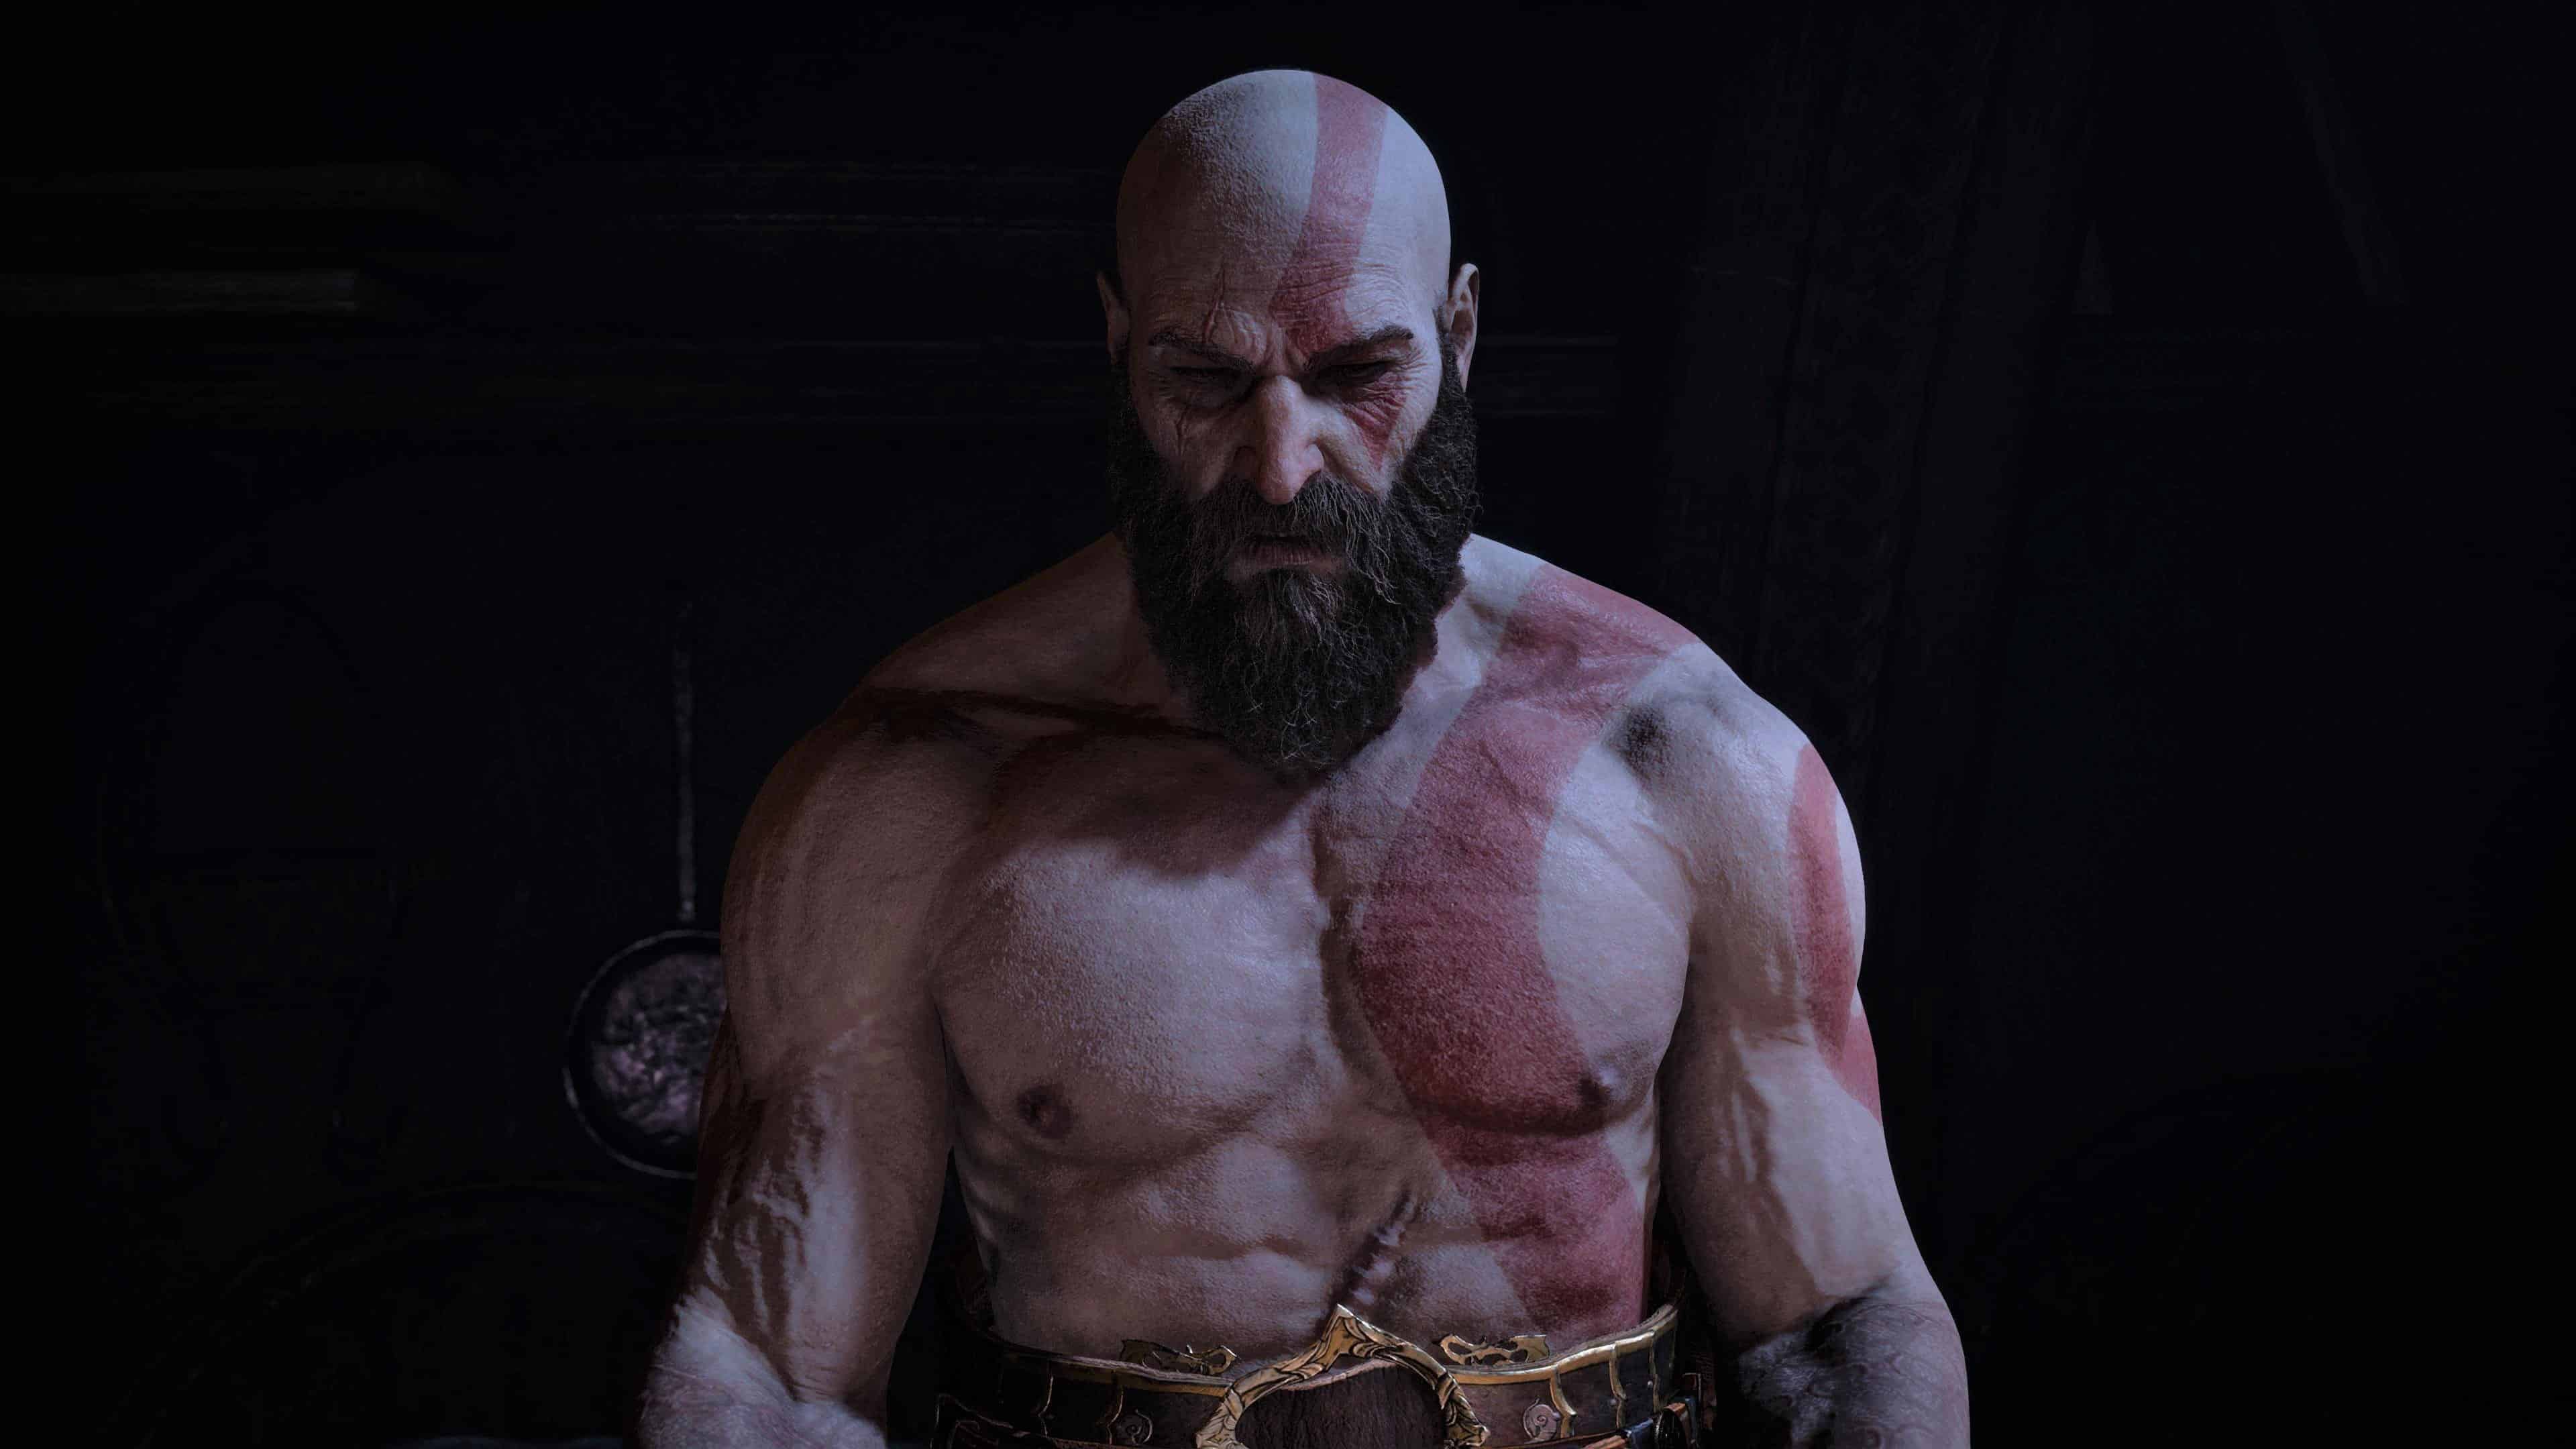 God of War Review: Trying to Grow Up